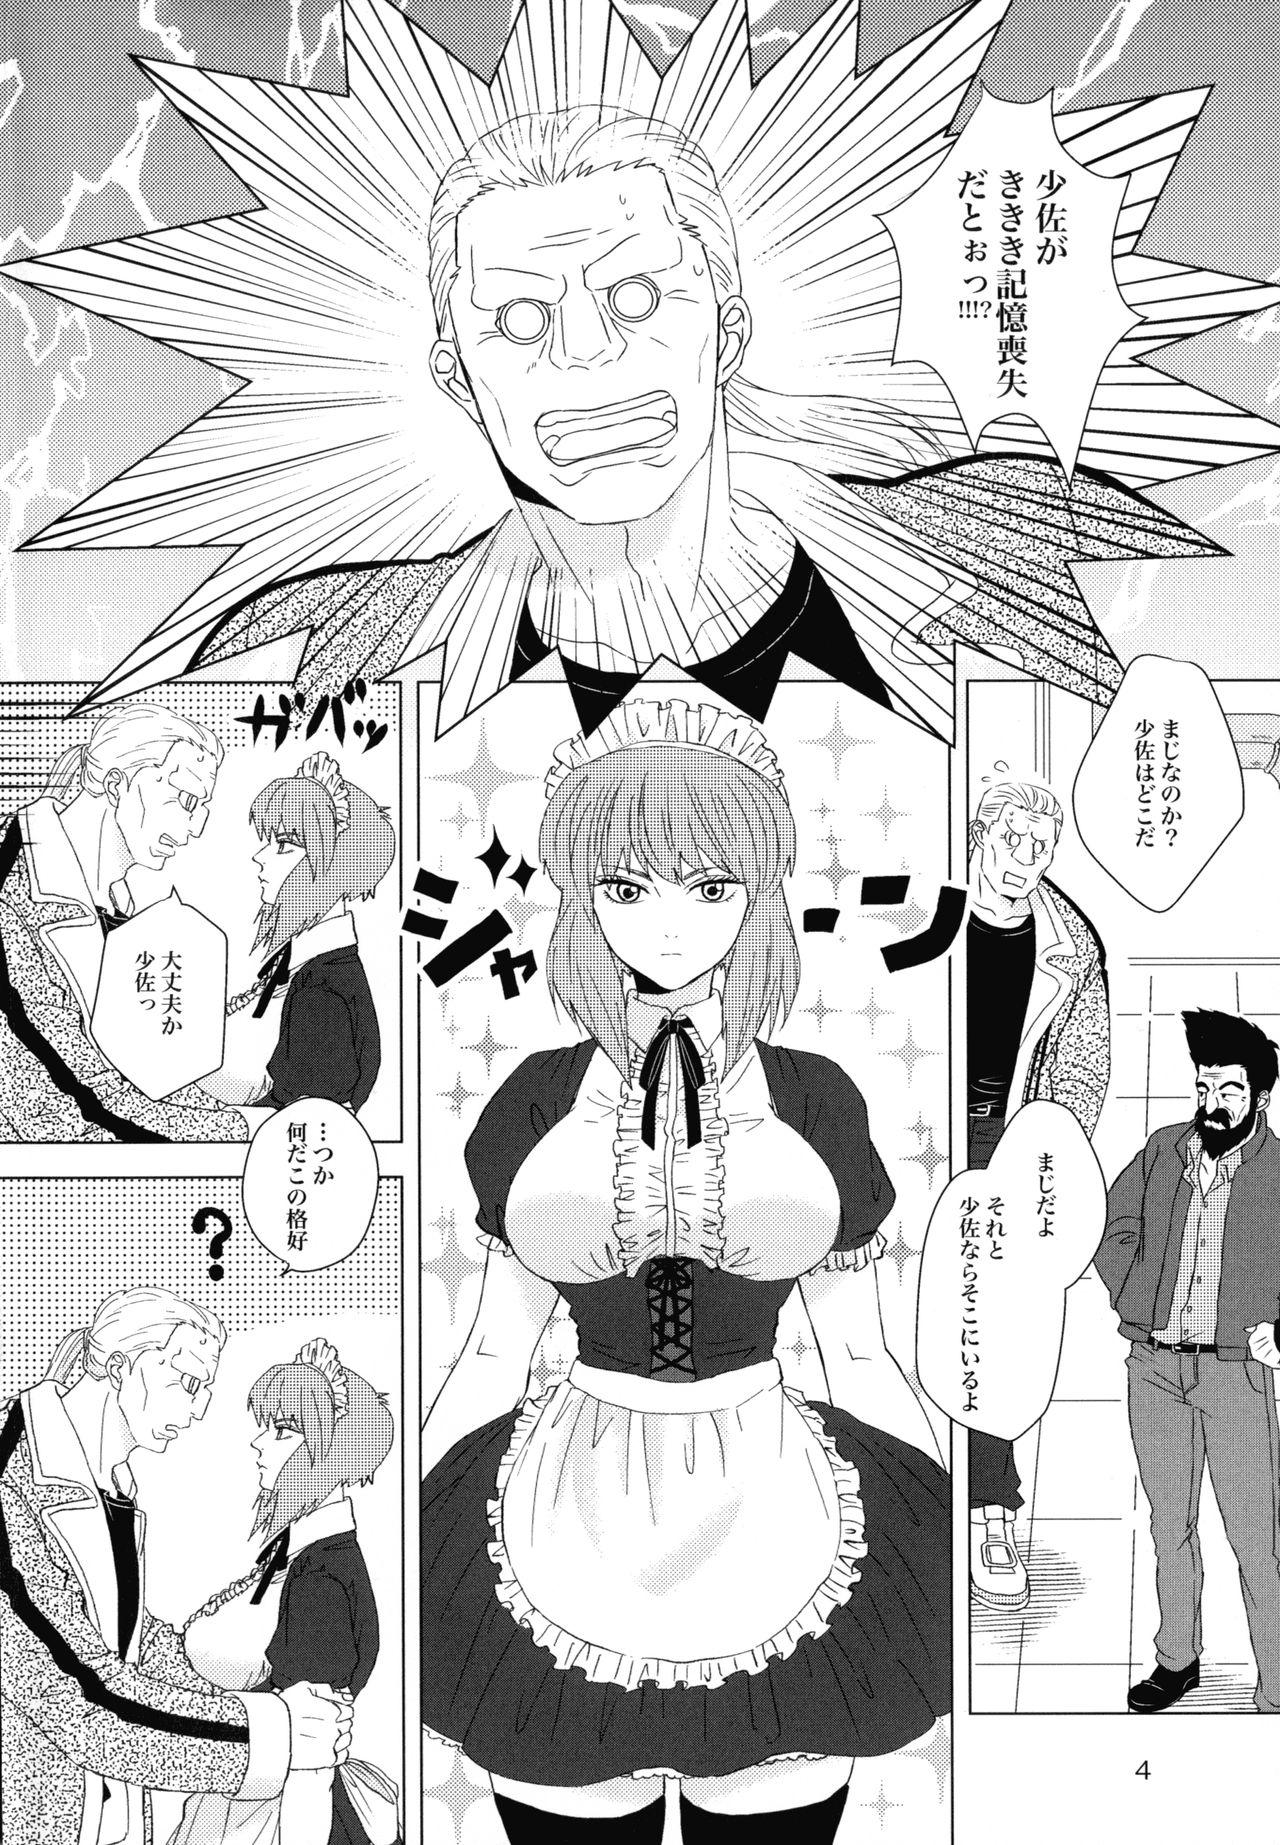 Anal Creampie FRENCHMAIDCOSTUME BTMT - Ghost in the shell Bus - Page 4